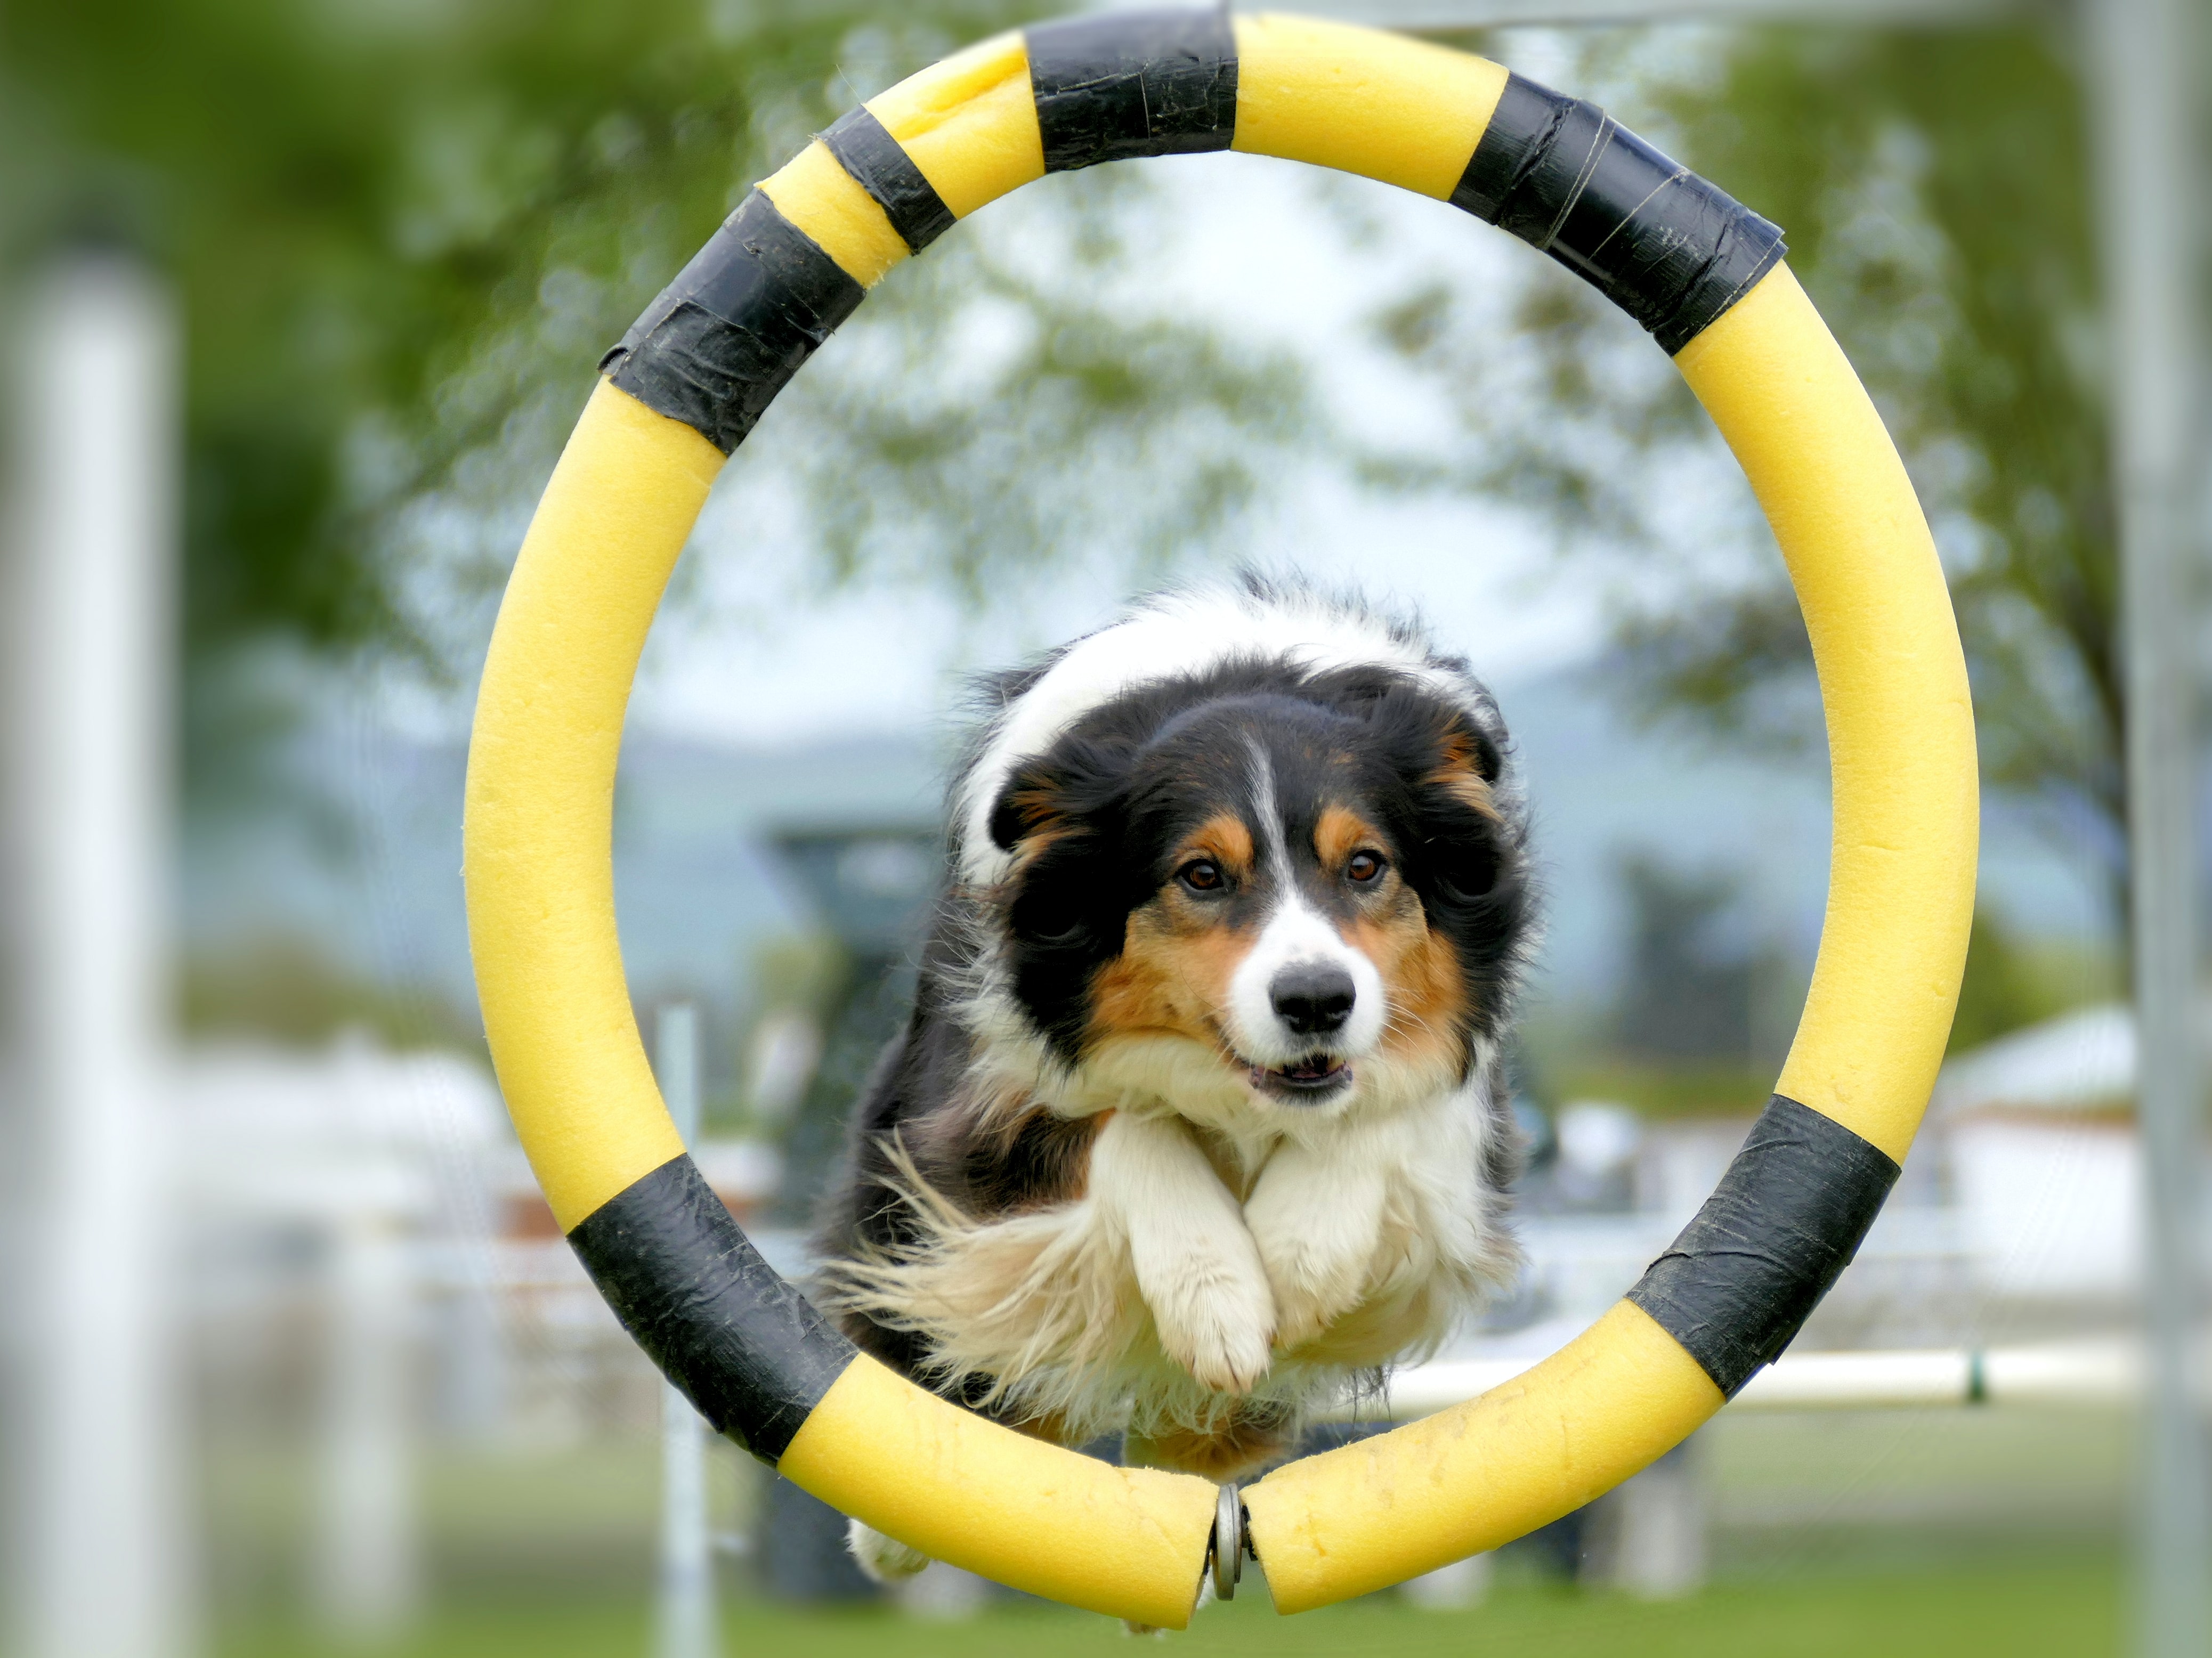 a dog jumping through the hook